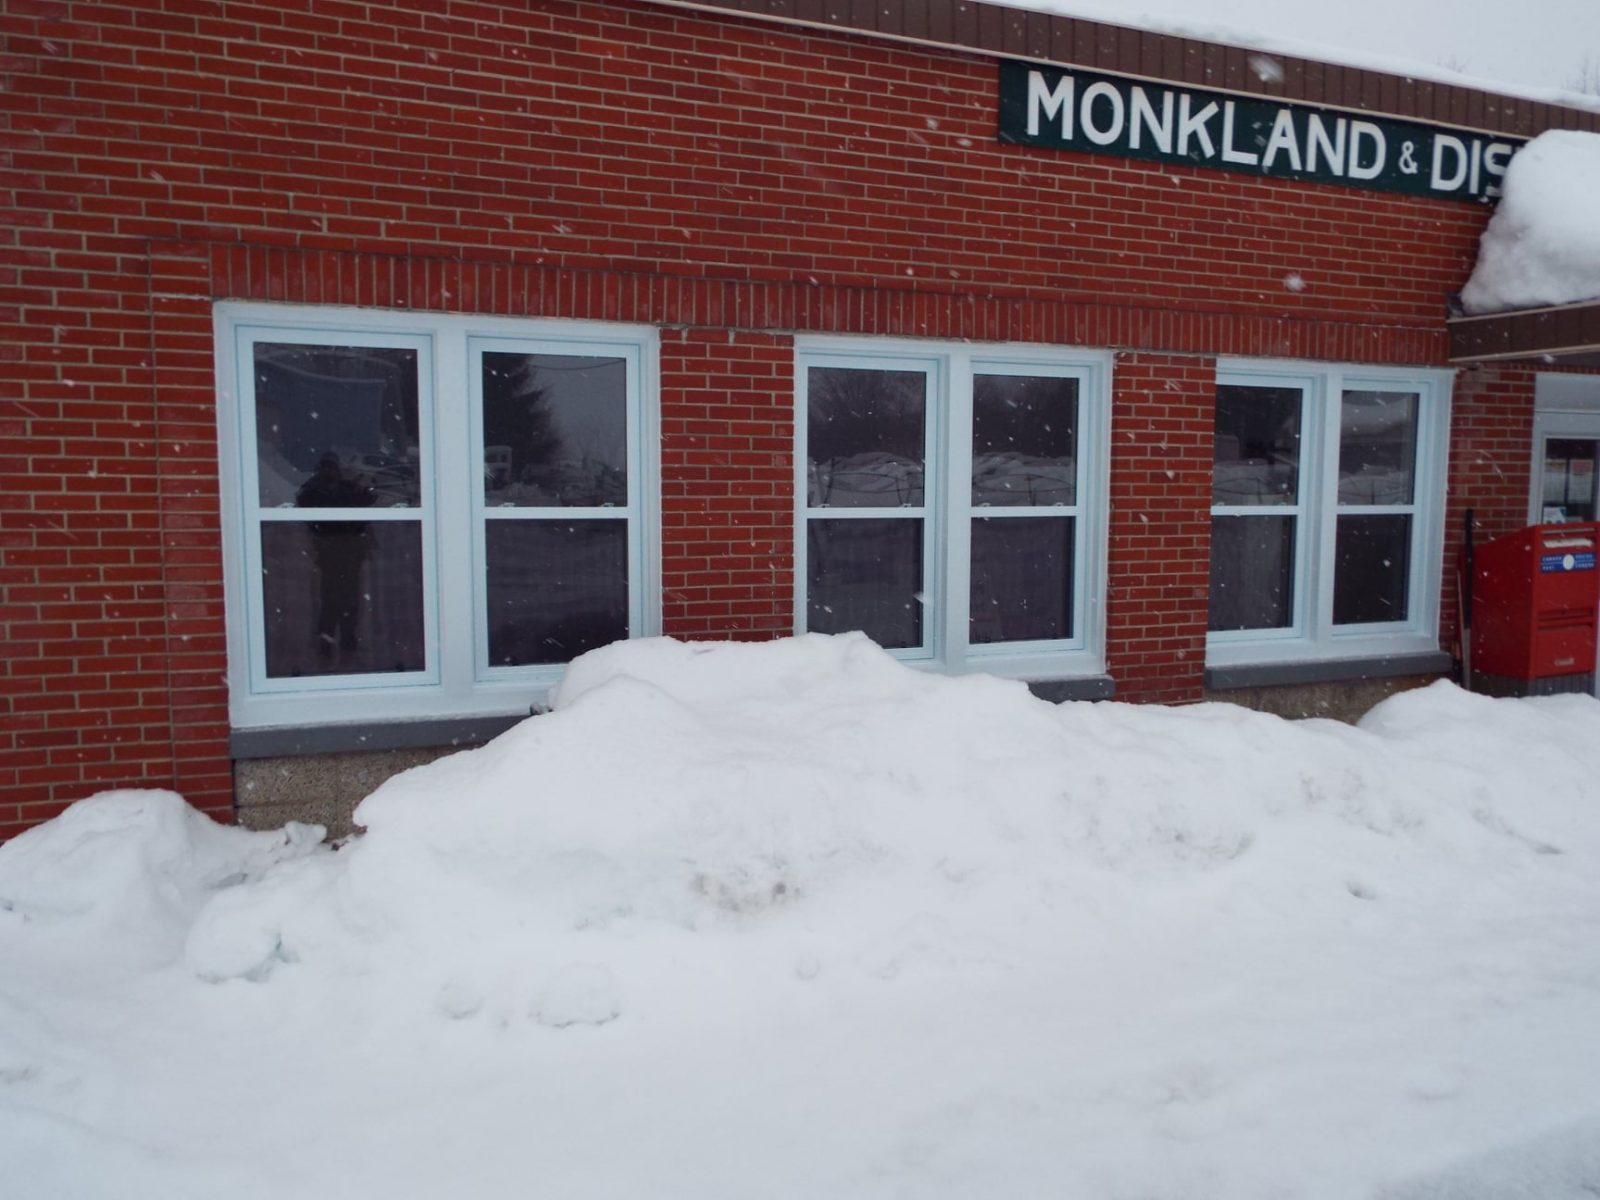 Monkland & District Community Center awarded $20K for upgrades